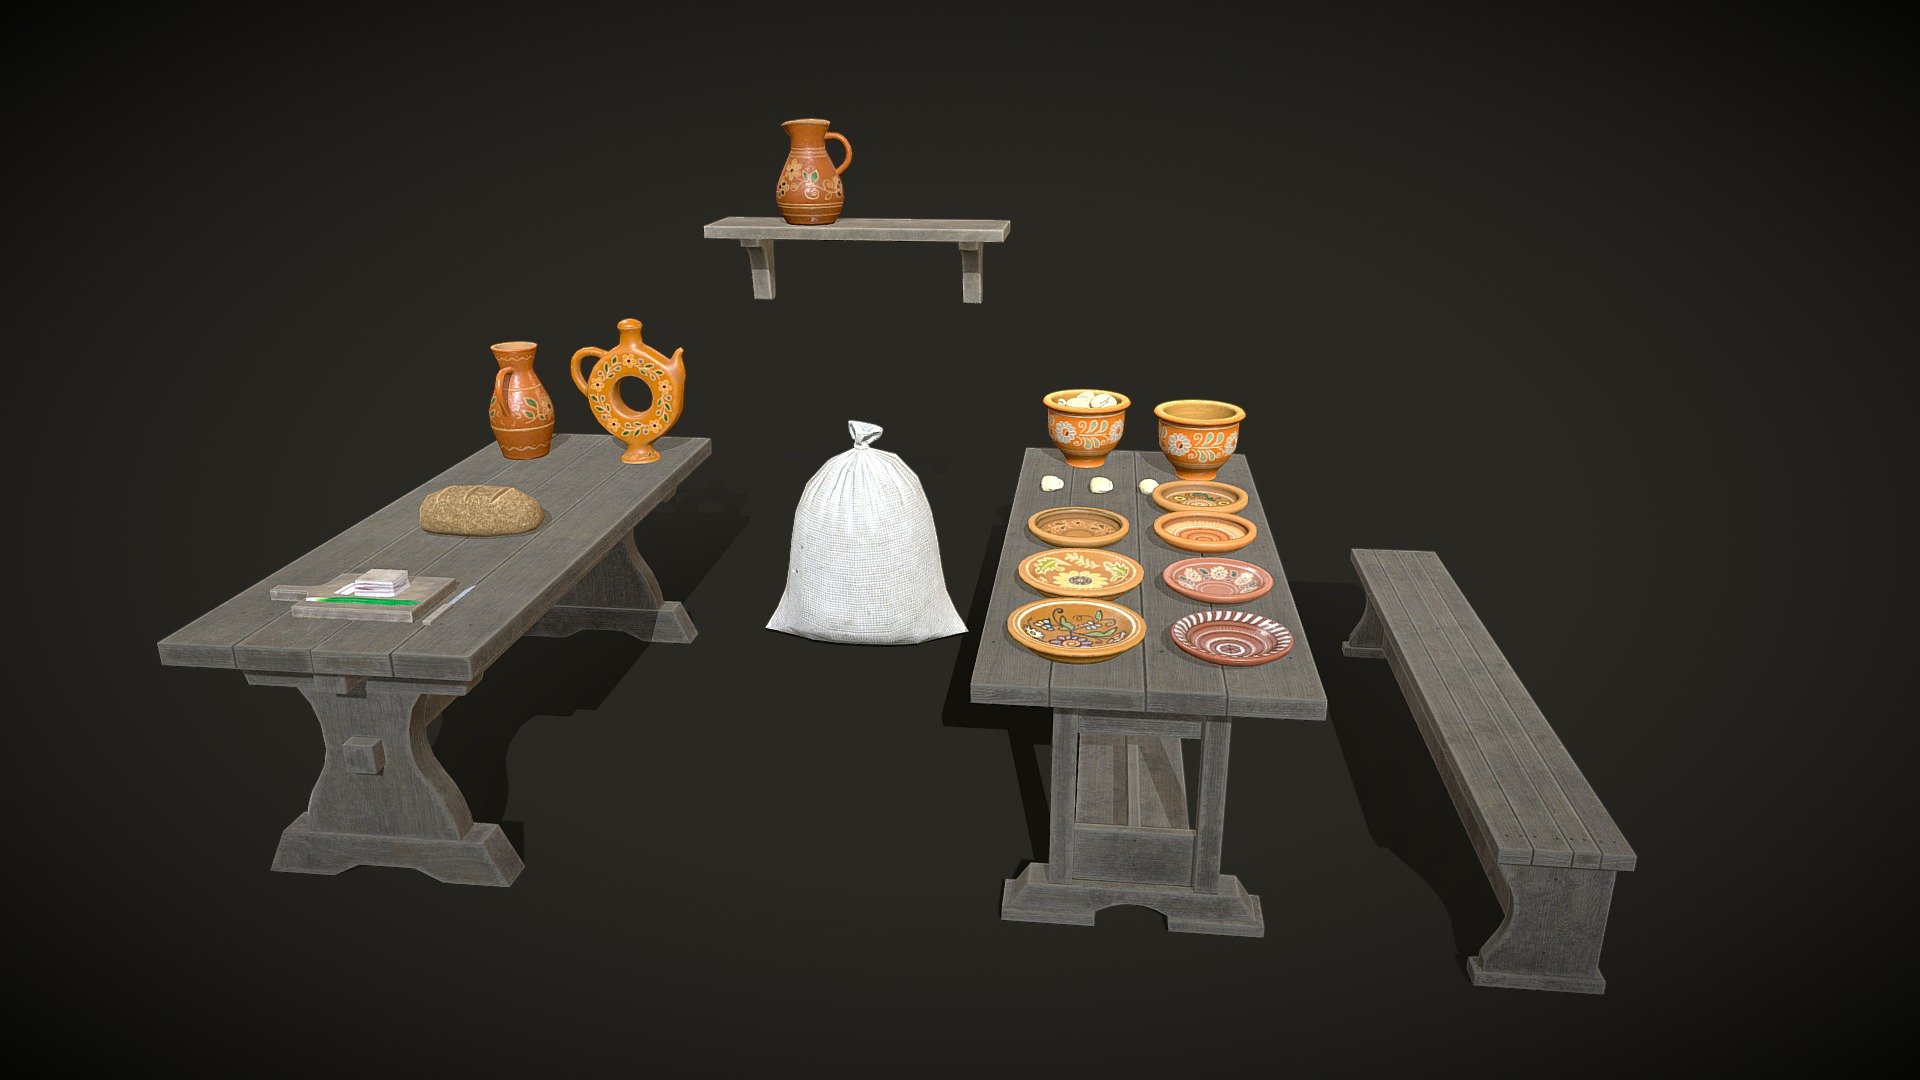 Medieval Ukrainian furniture, dishes end food
Lowpol 3D model with PBR textures
15683 tris
8061 vertices - Medieval Ukrainian furniture, dishes end food - 3D model by nester1279 3d model